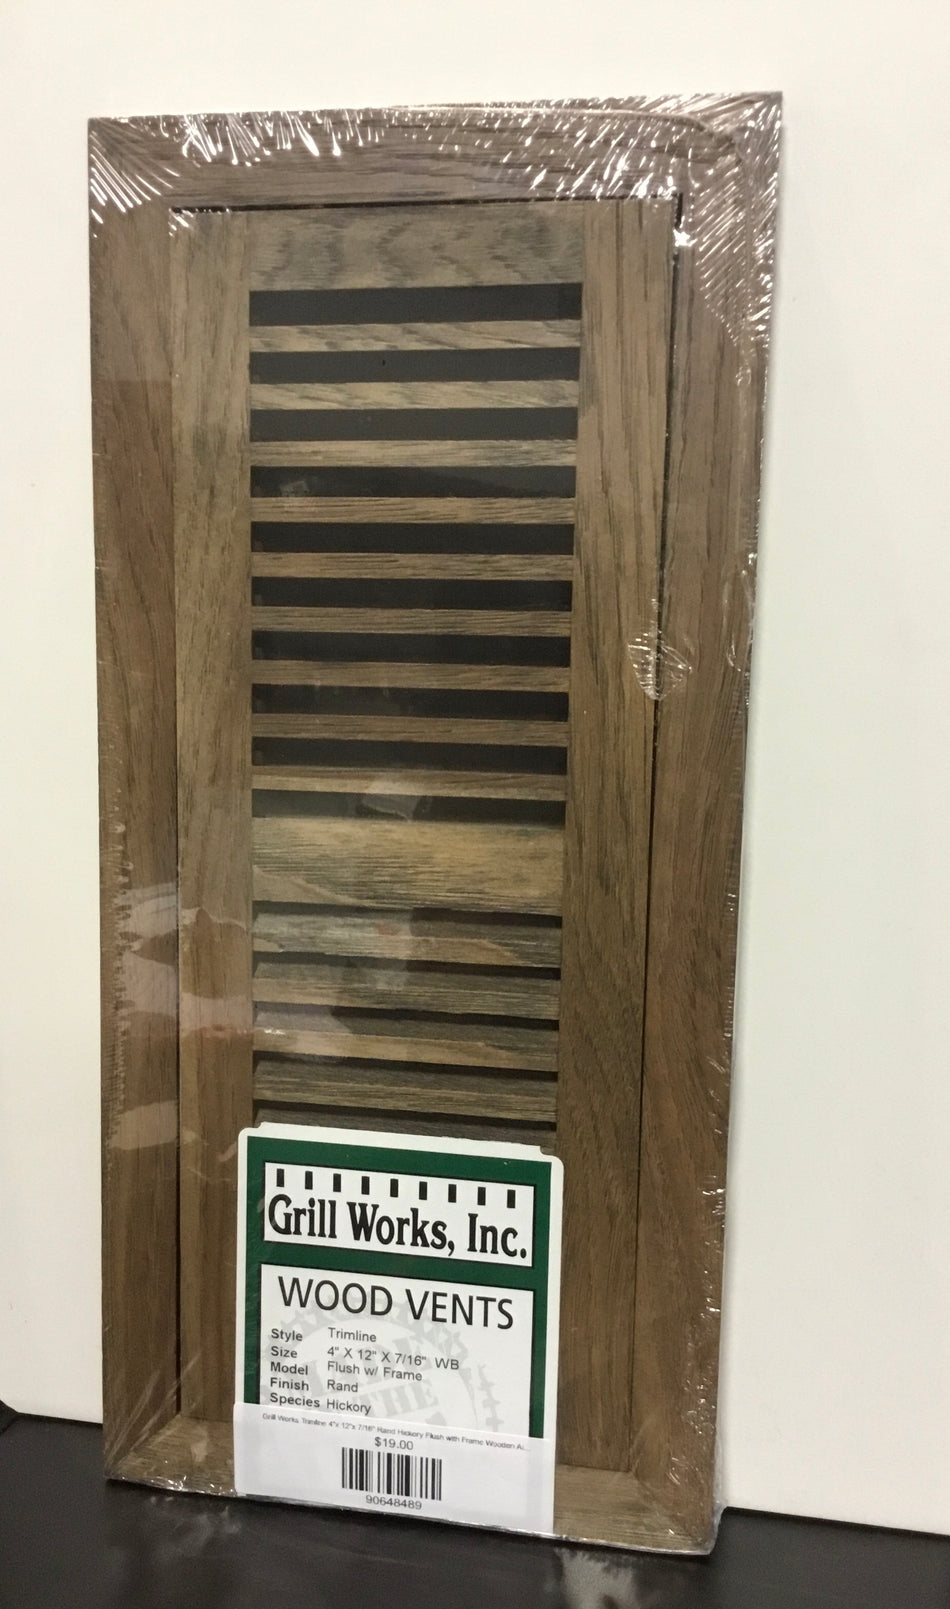 Grill Works Trimline 4"x 12"x 7/16" Rand Hickory Flush with Frame Wooden Air Vent